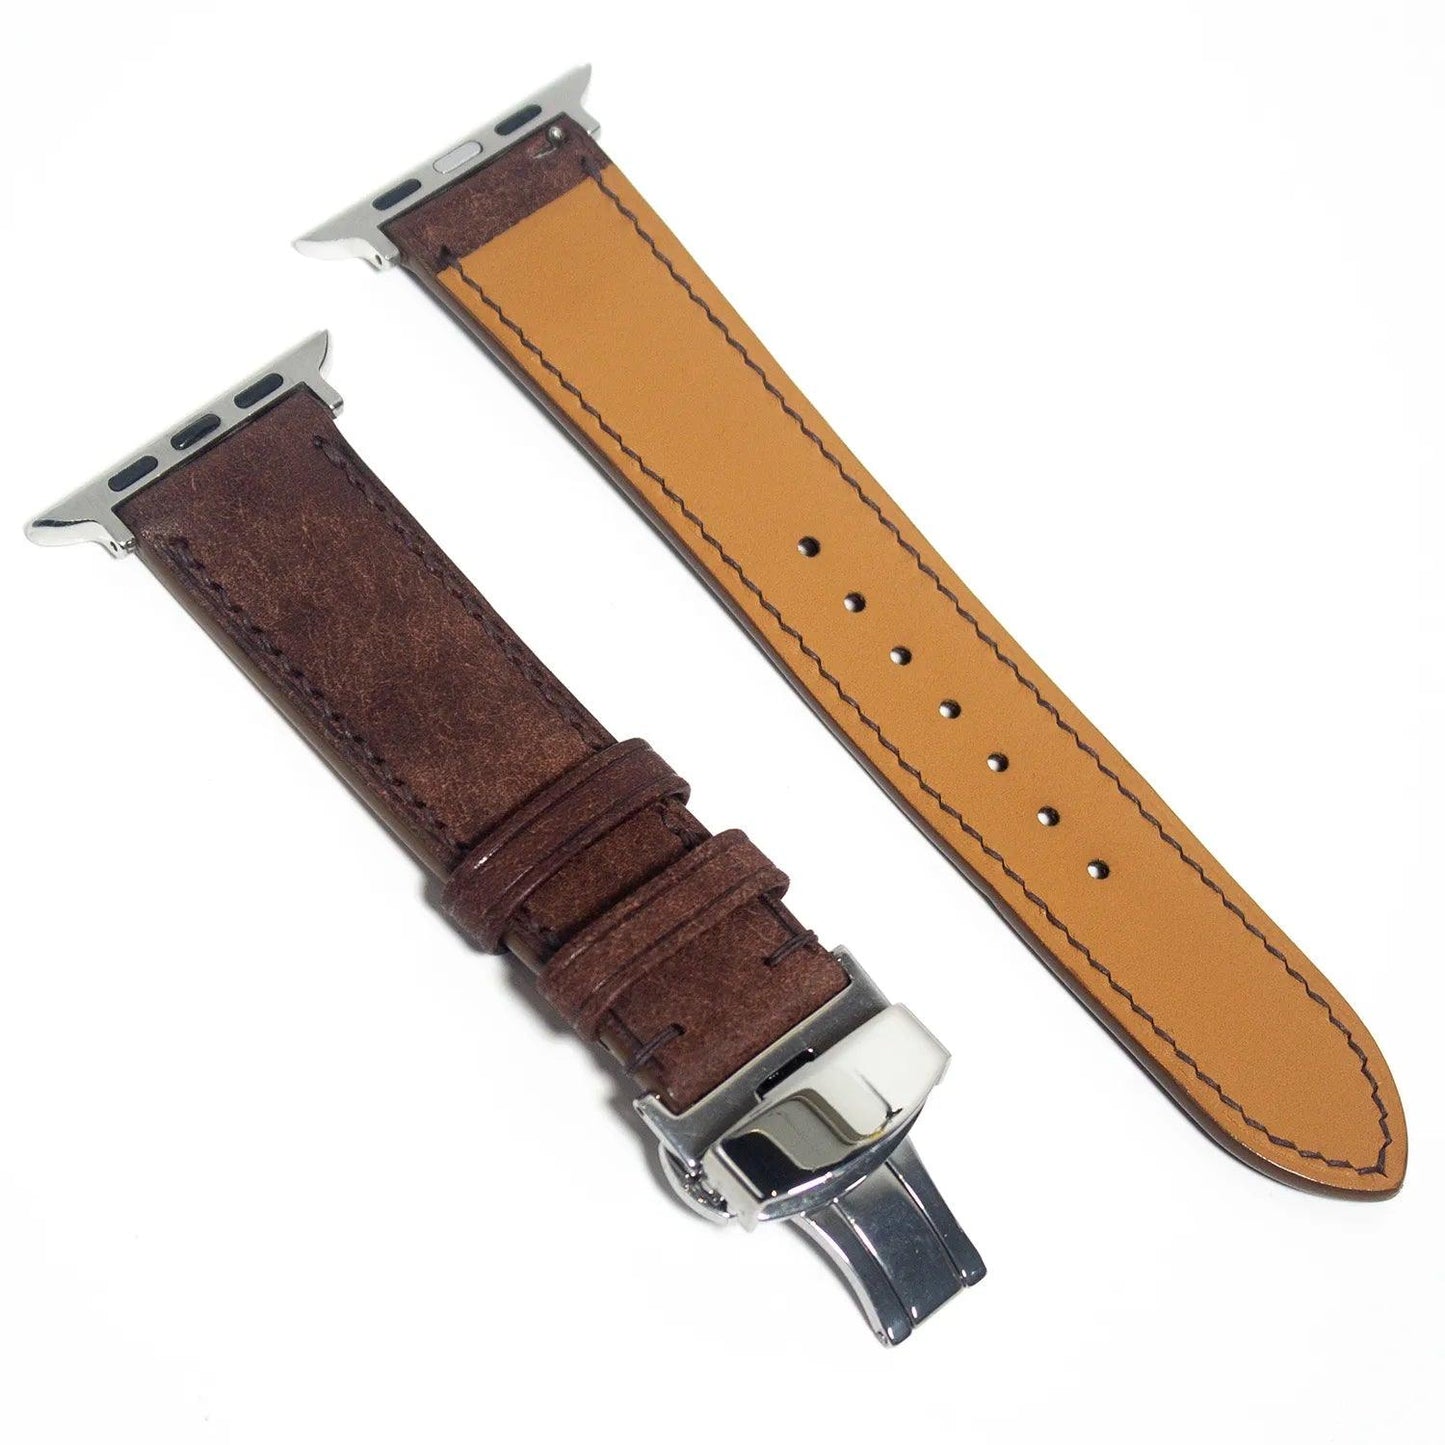 Handcrafted leather watch bands from Italian brown Pueblo leather, perfect for those seeking artisanal elegance.